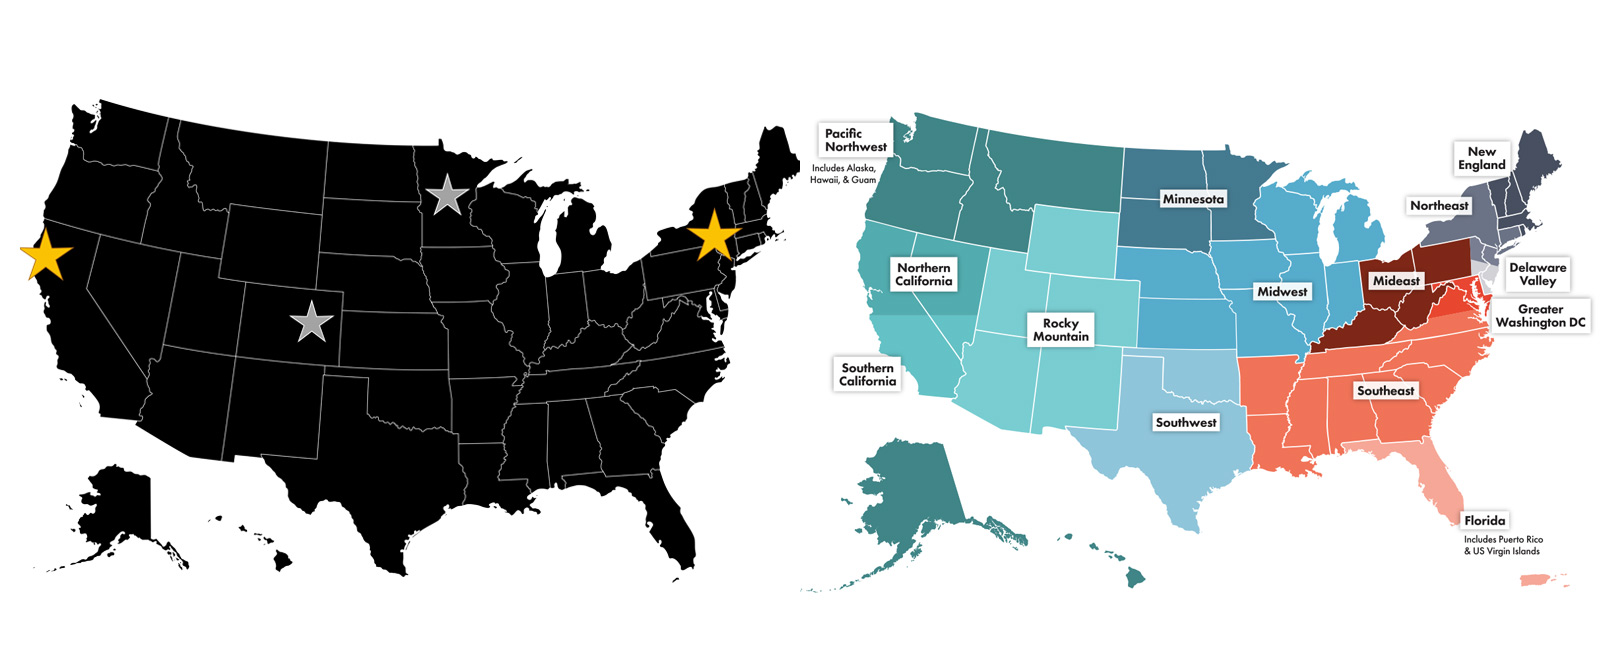 Two maps are side by side to show how PEAK chapters have expanded across the US over the years